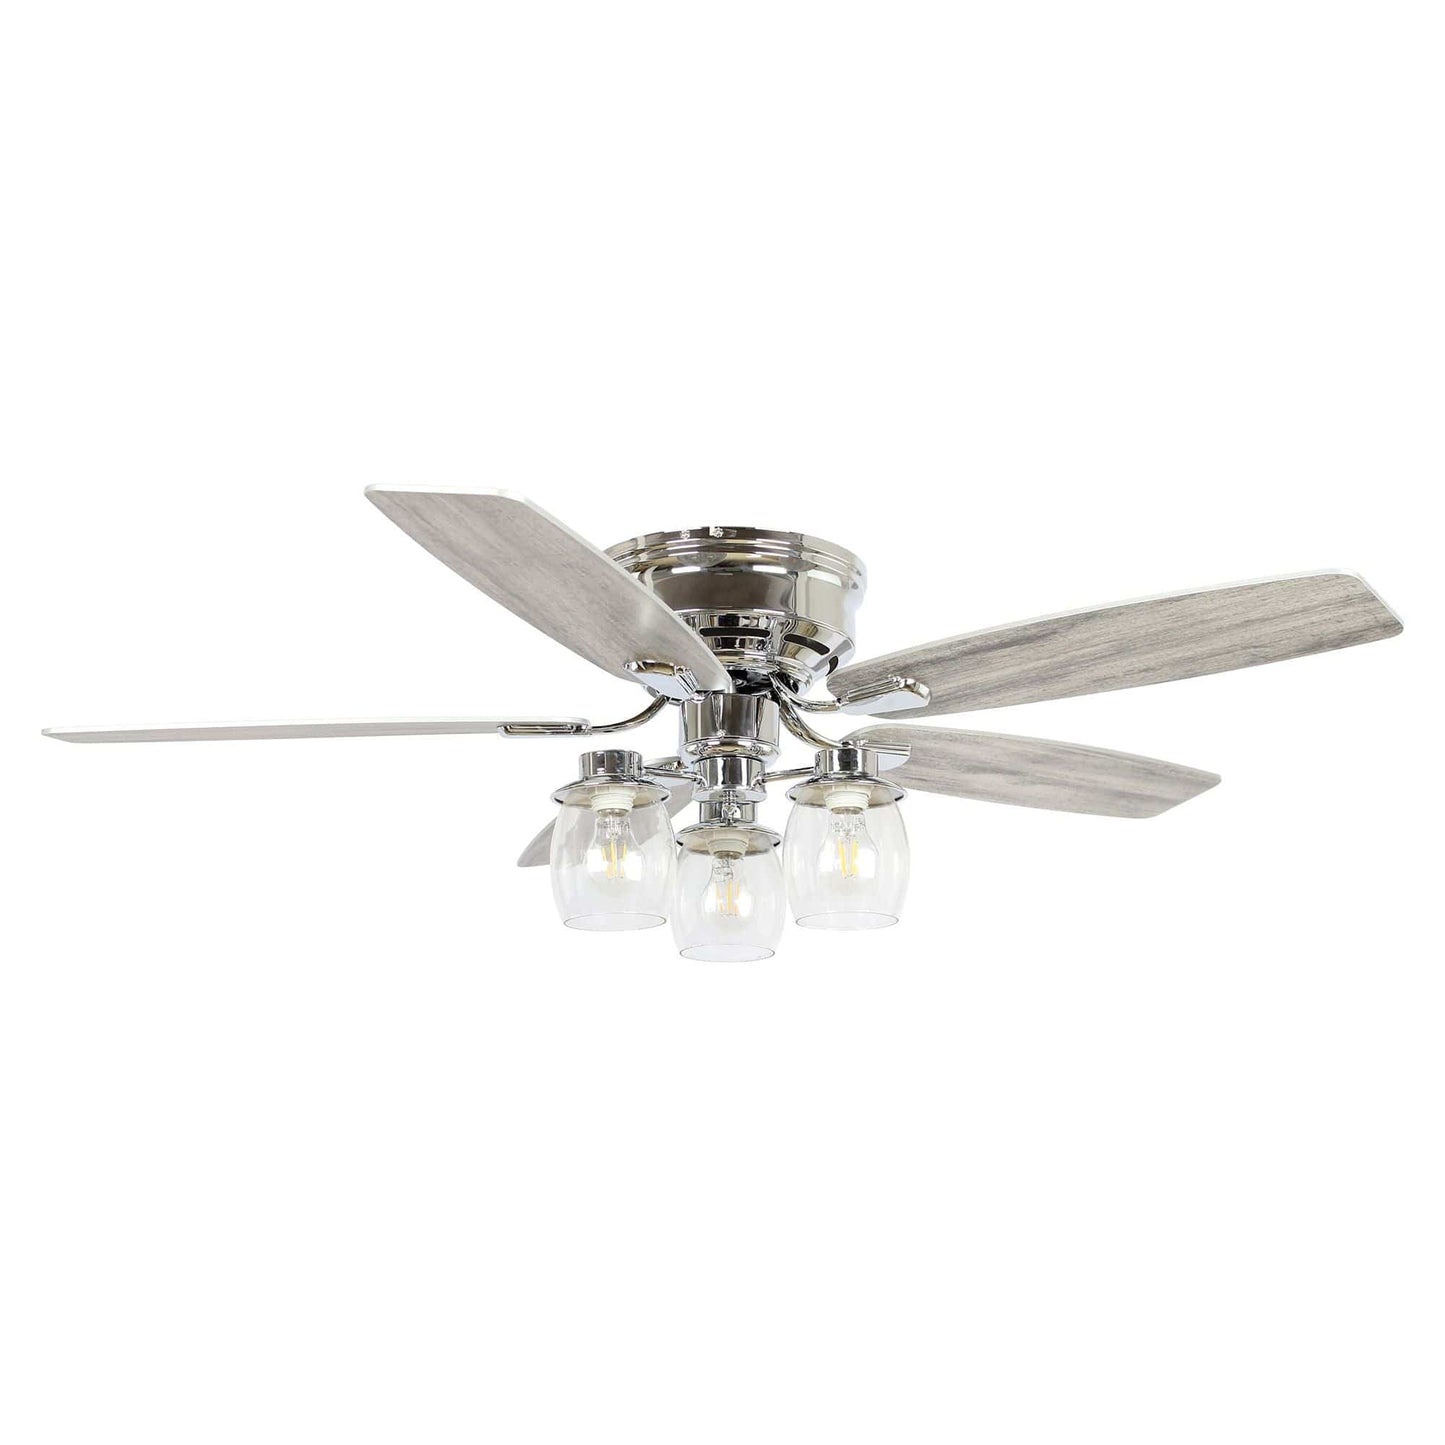 Parrot Uncle 52" Bangatore Modern Chrome Flush Mount Reversible Ceiling Fan with Lighting and Remote Control